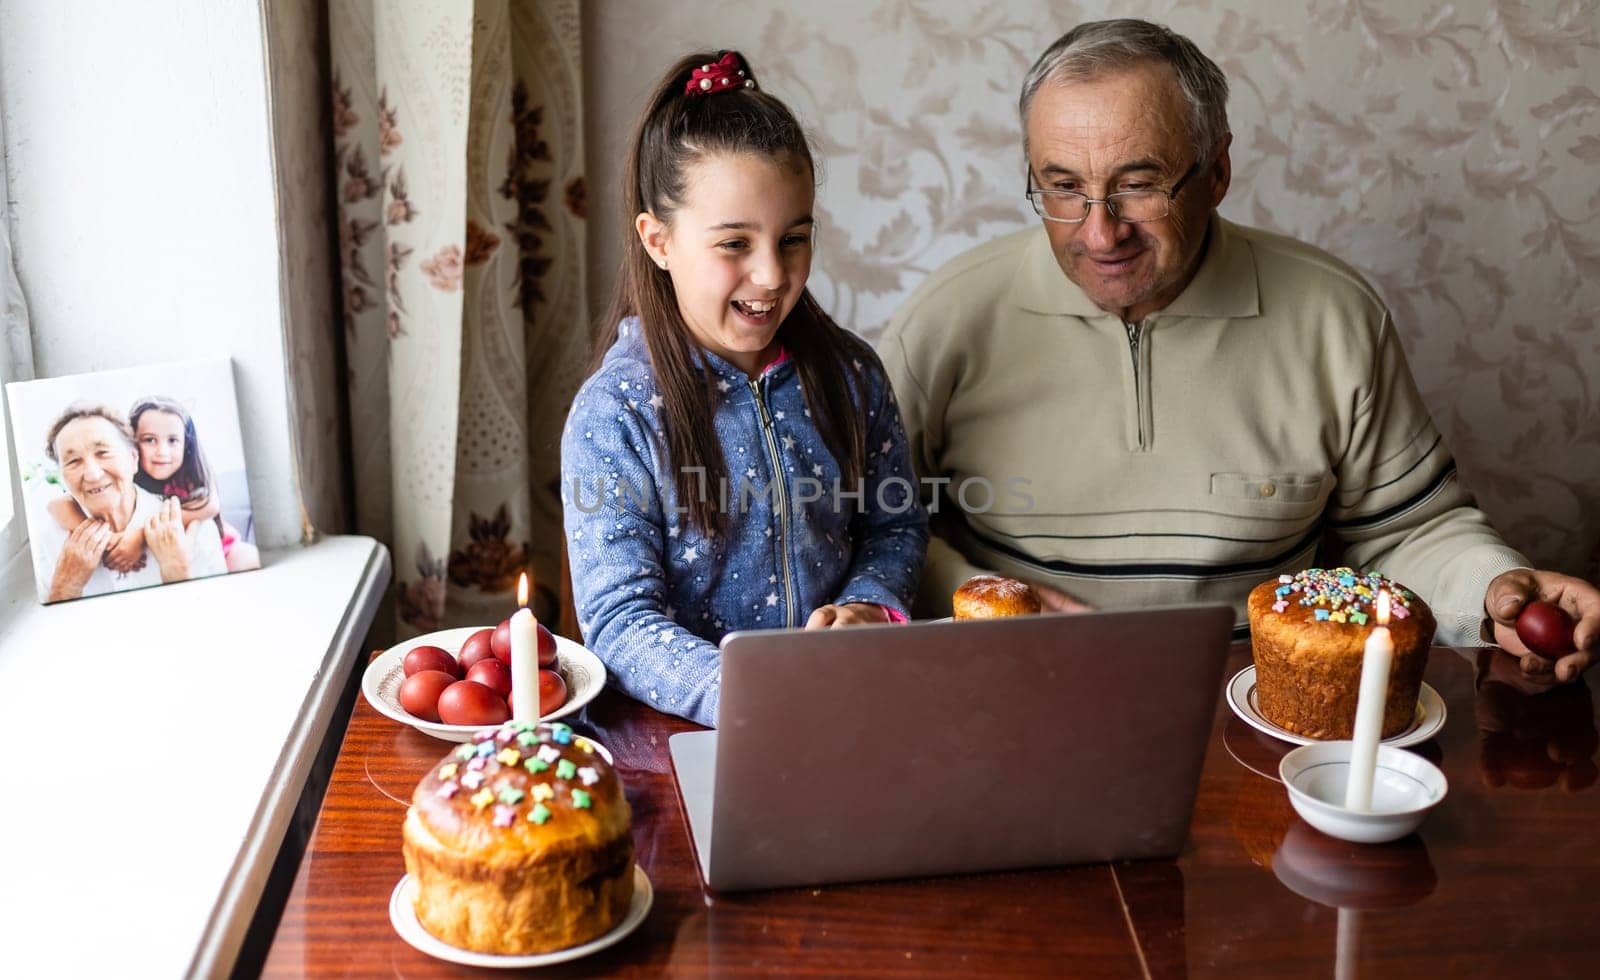 grandfather and granddaughter are talking via video link to their friends. Decorated table with colorful eggs and cake. Chatting during the COVID pandemic and the Easter holidays by Andelov13